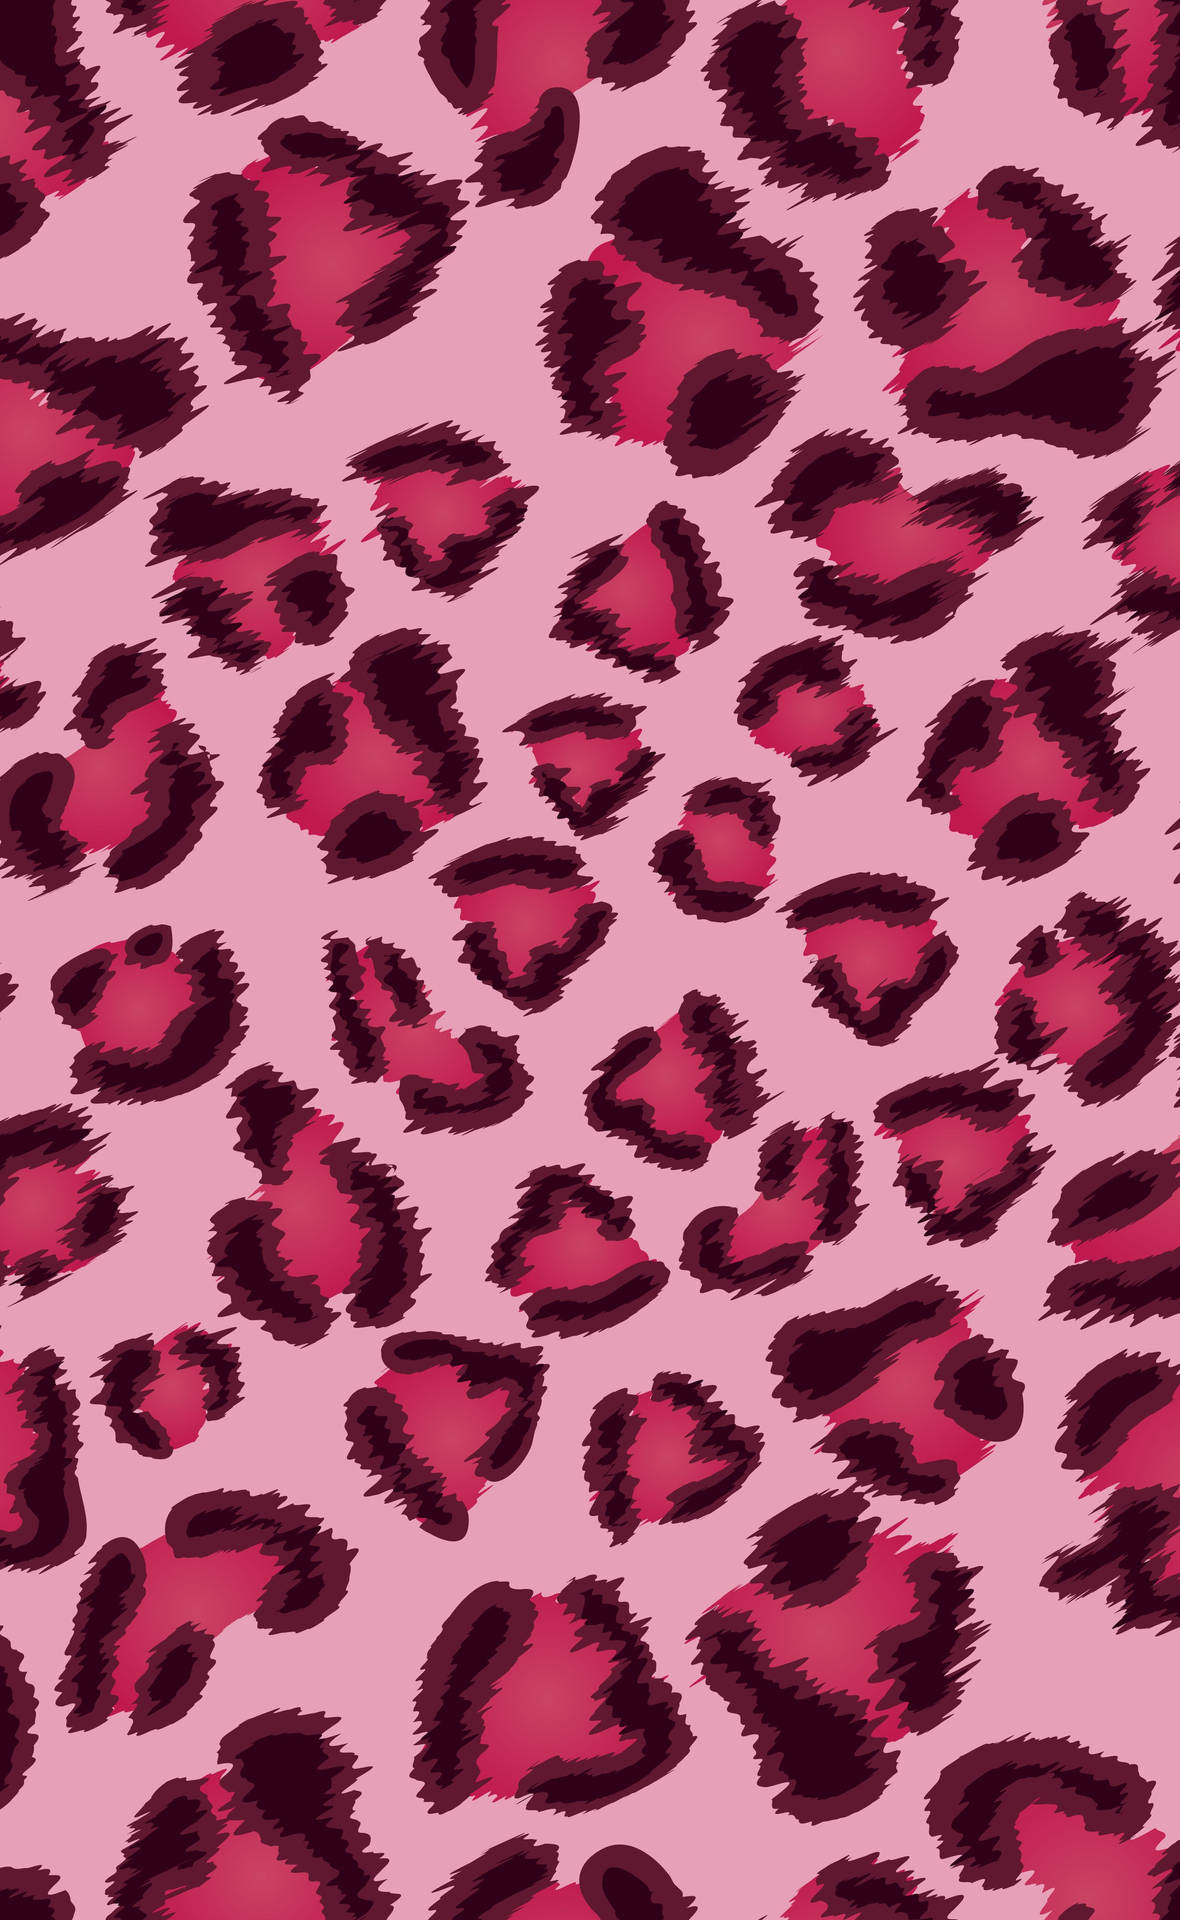 Leopard Print 3074X5000 Wallpaper and Background Image